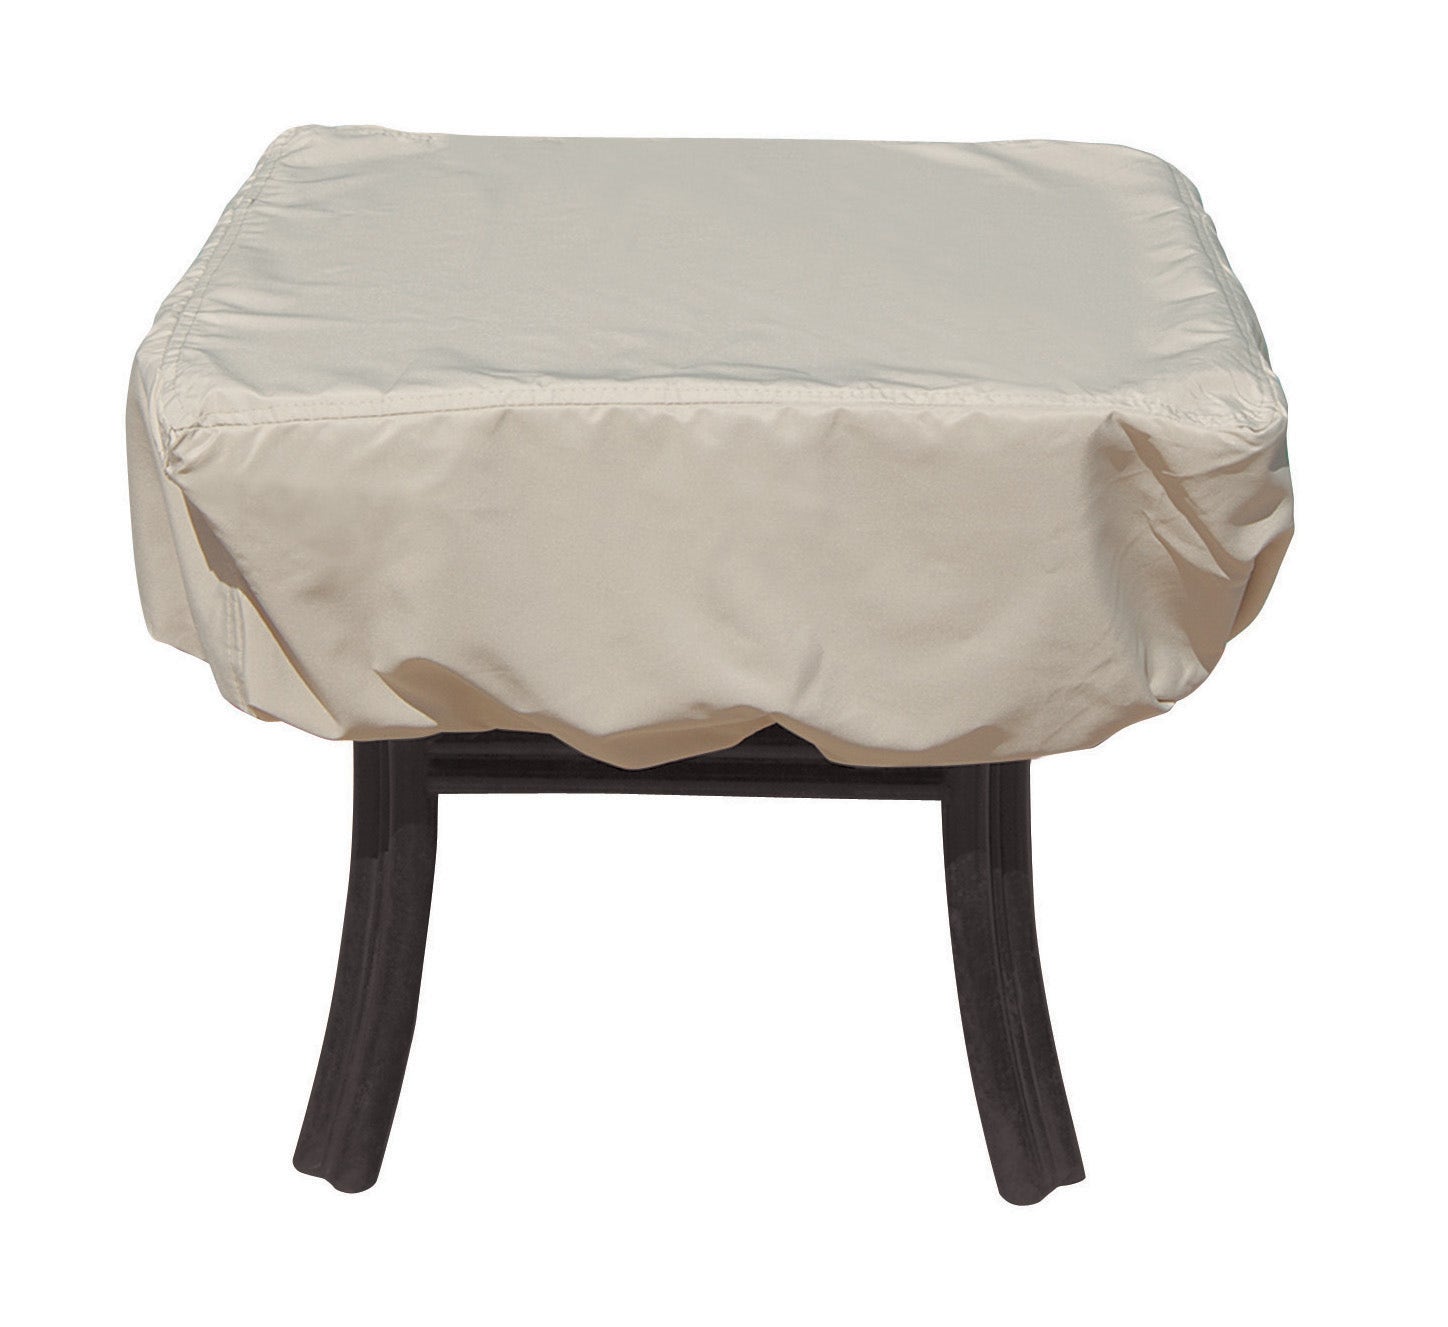 Treasure Garden Protective Cover for Square or Round Side Table Outdoor Furniture Covers 12025361